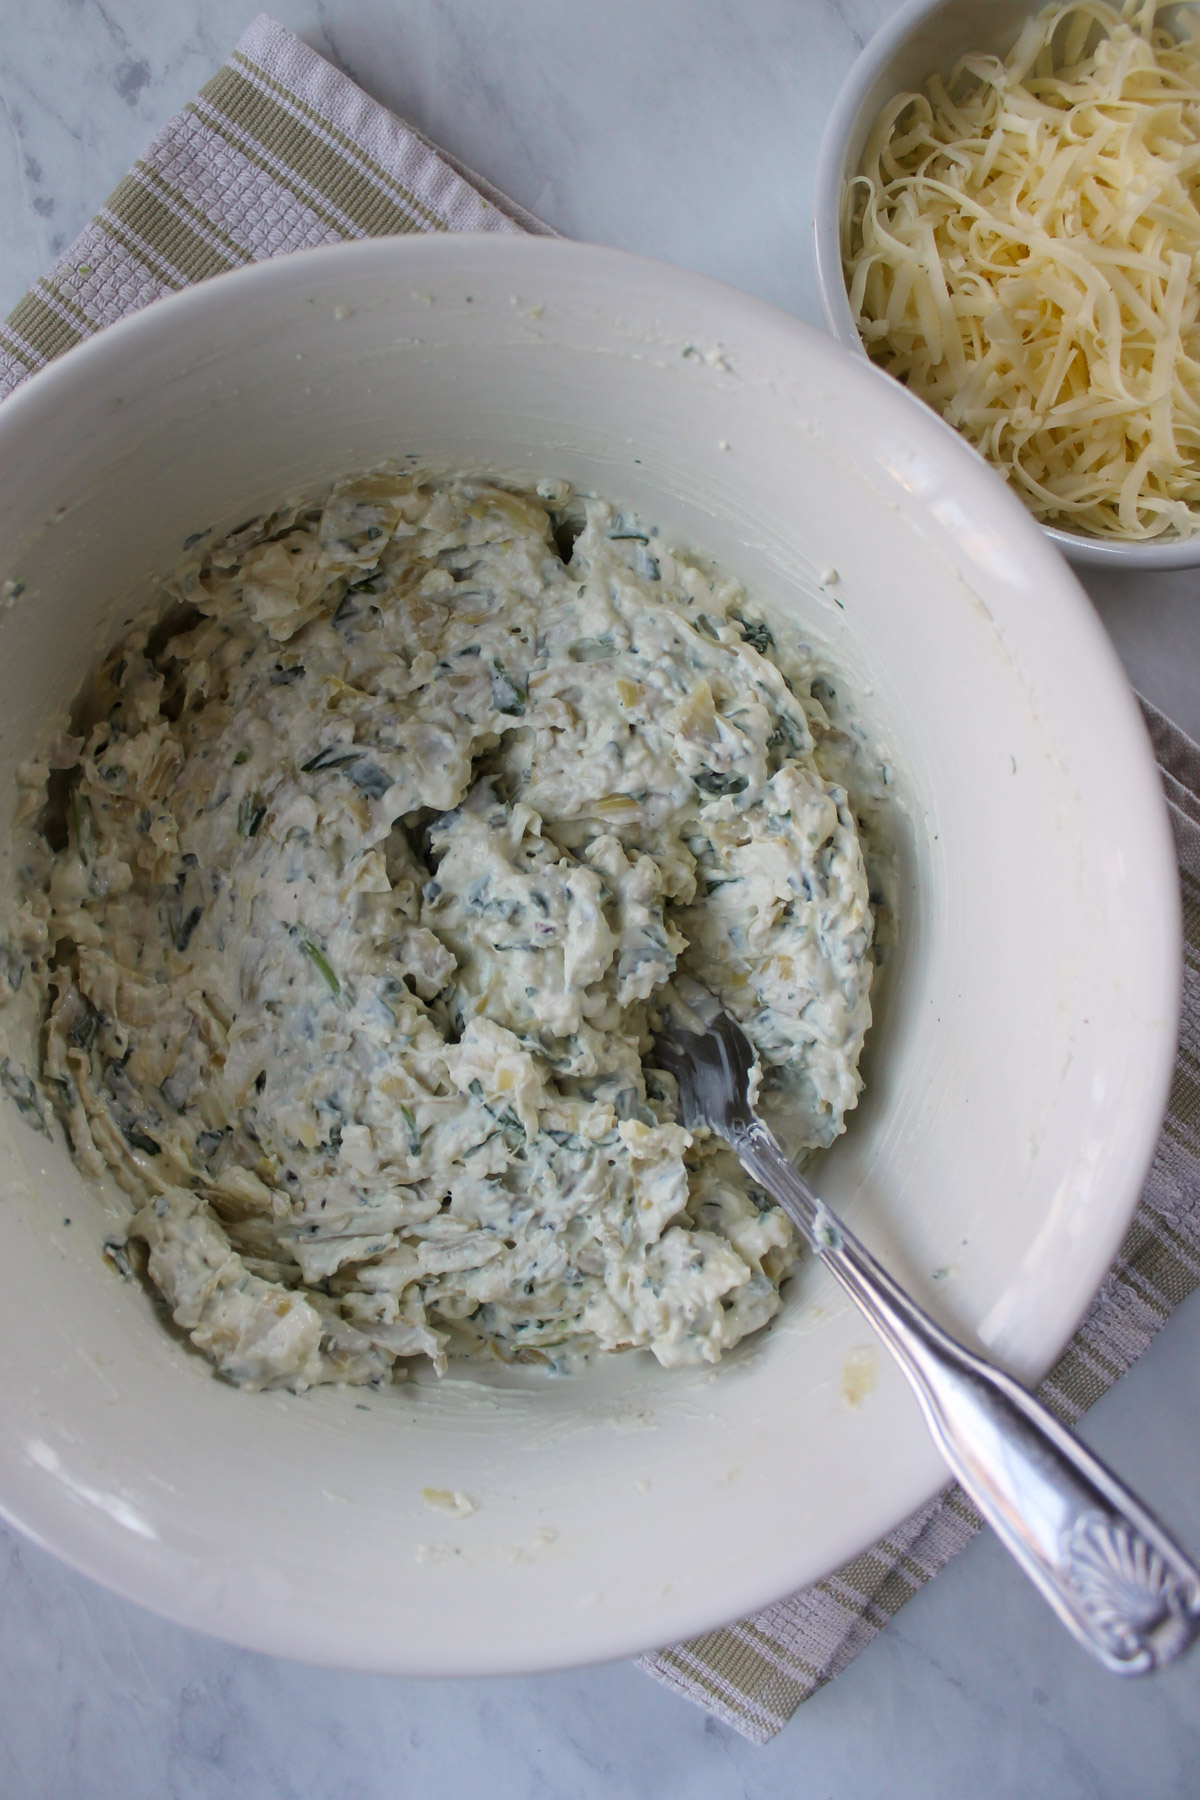 Goat cheese artichoke dip ingredients mixed together in a bowl.